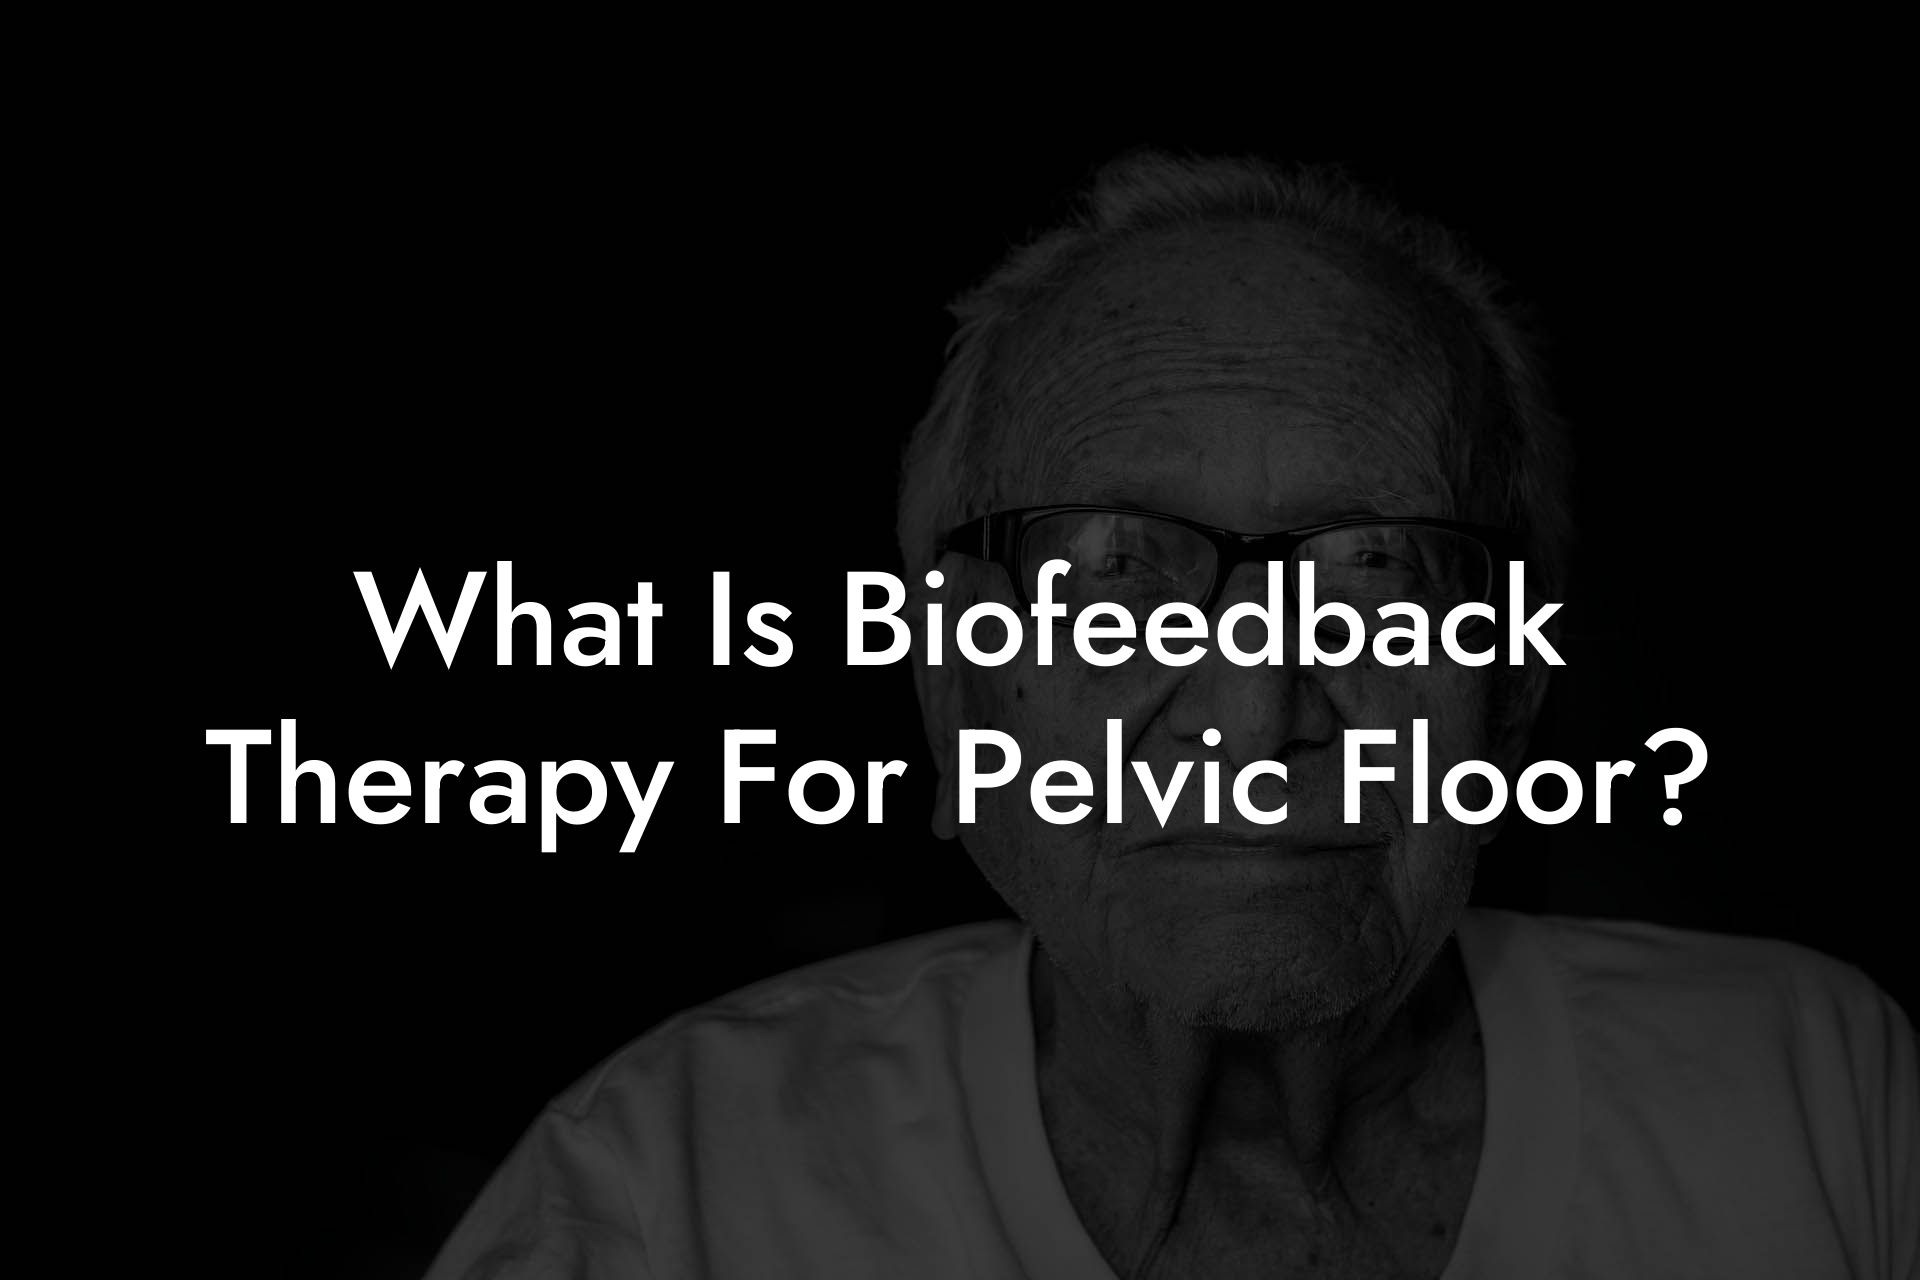 What Is Biofeedback Therapy For Pelvic Floor?